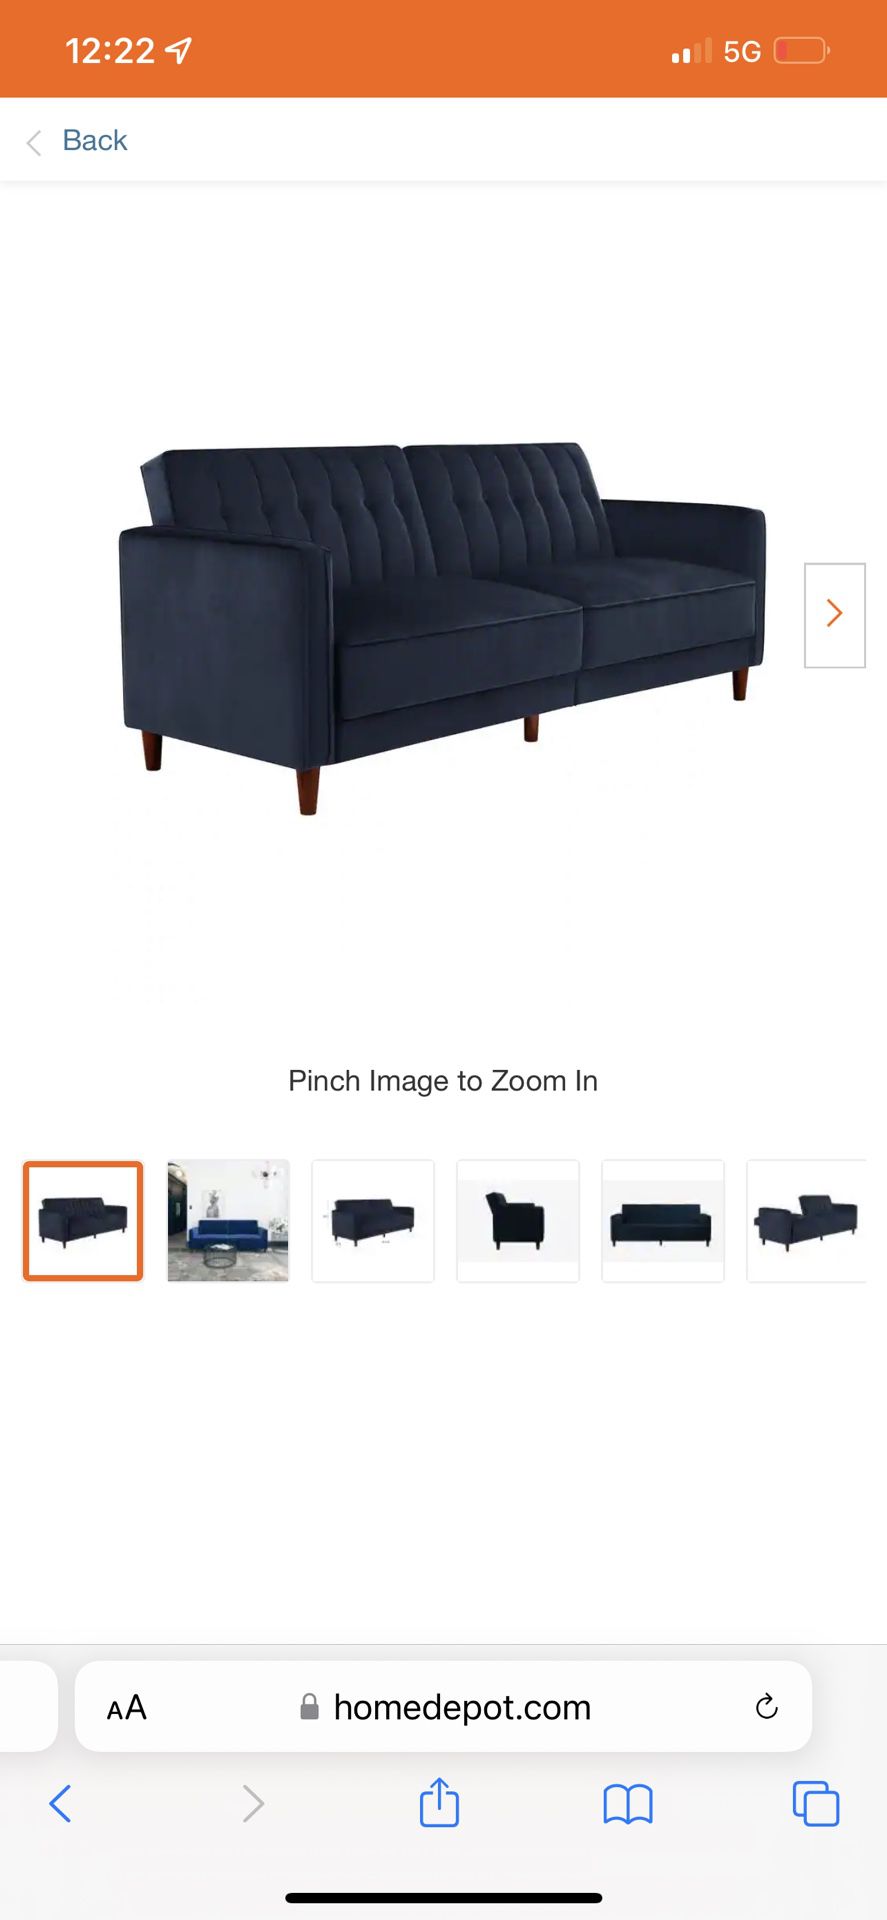 DHP Pin Tufted Transitional Futon Couch blue velvet